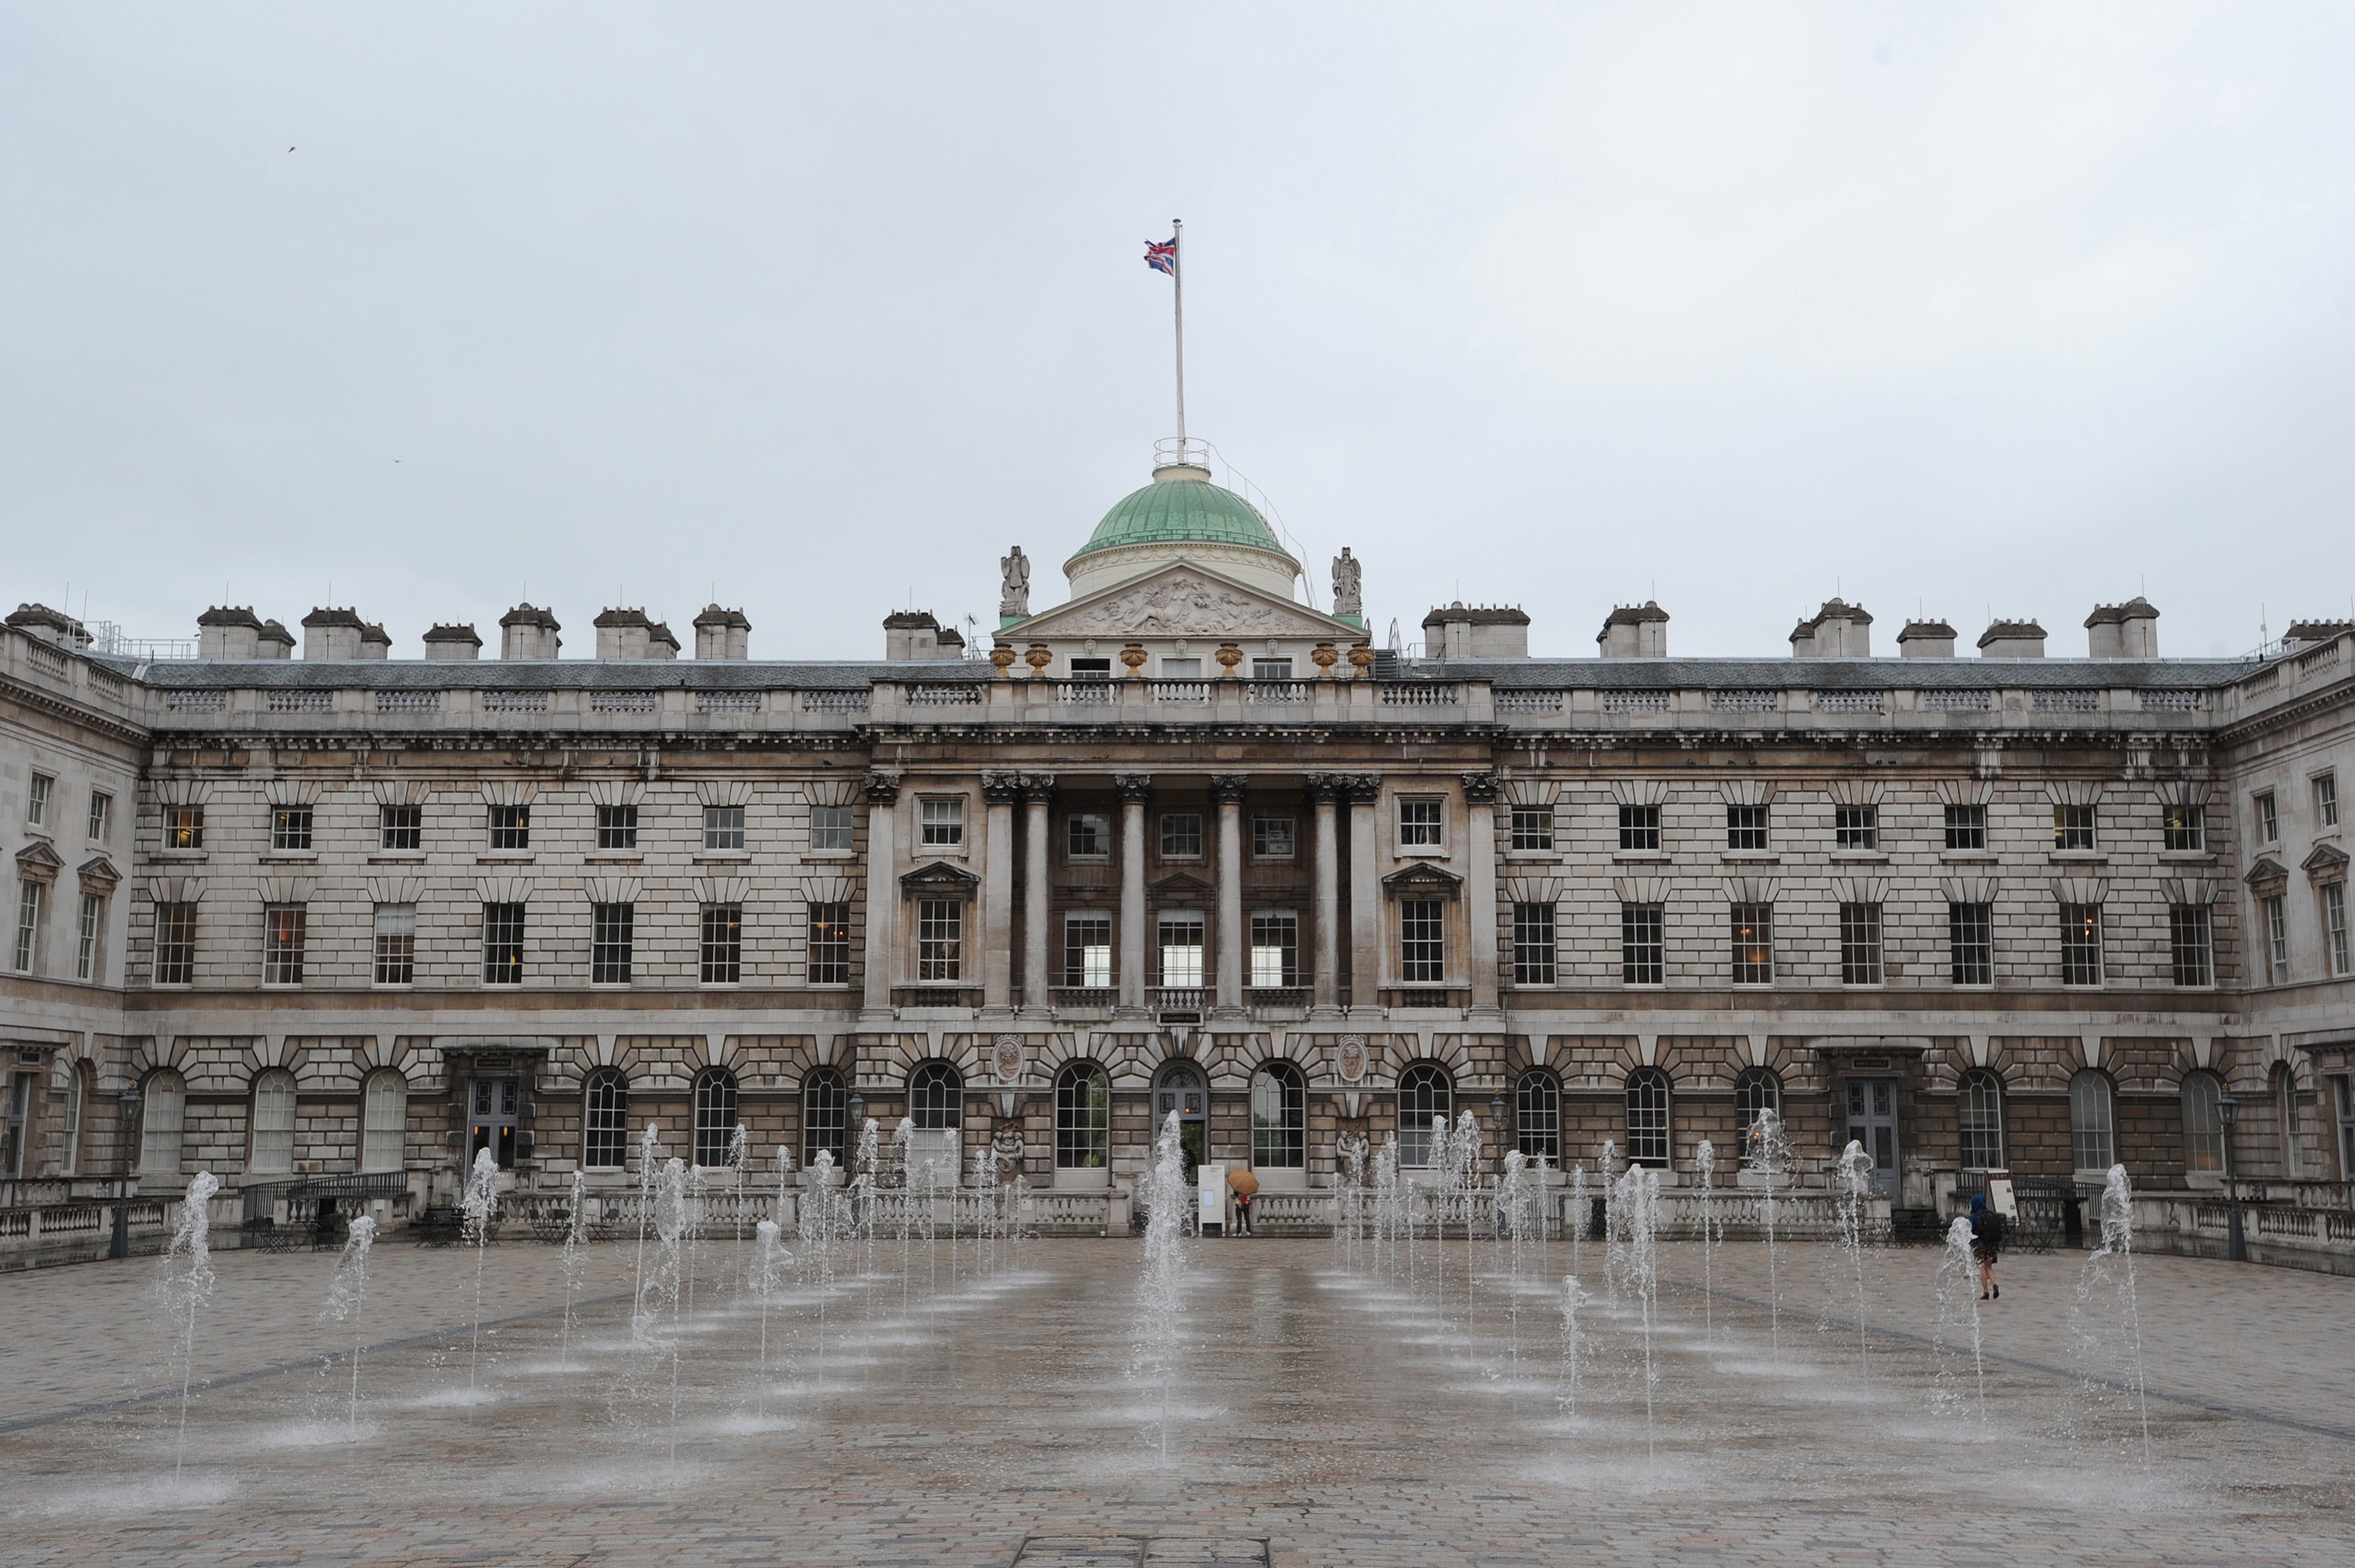 Somerset House, the setting of 1:54. Courtesy of Getty Images.